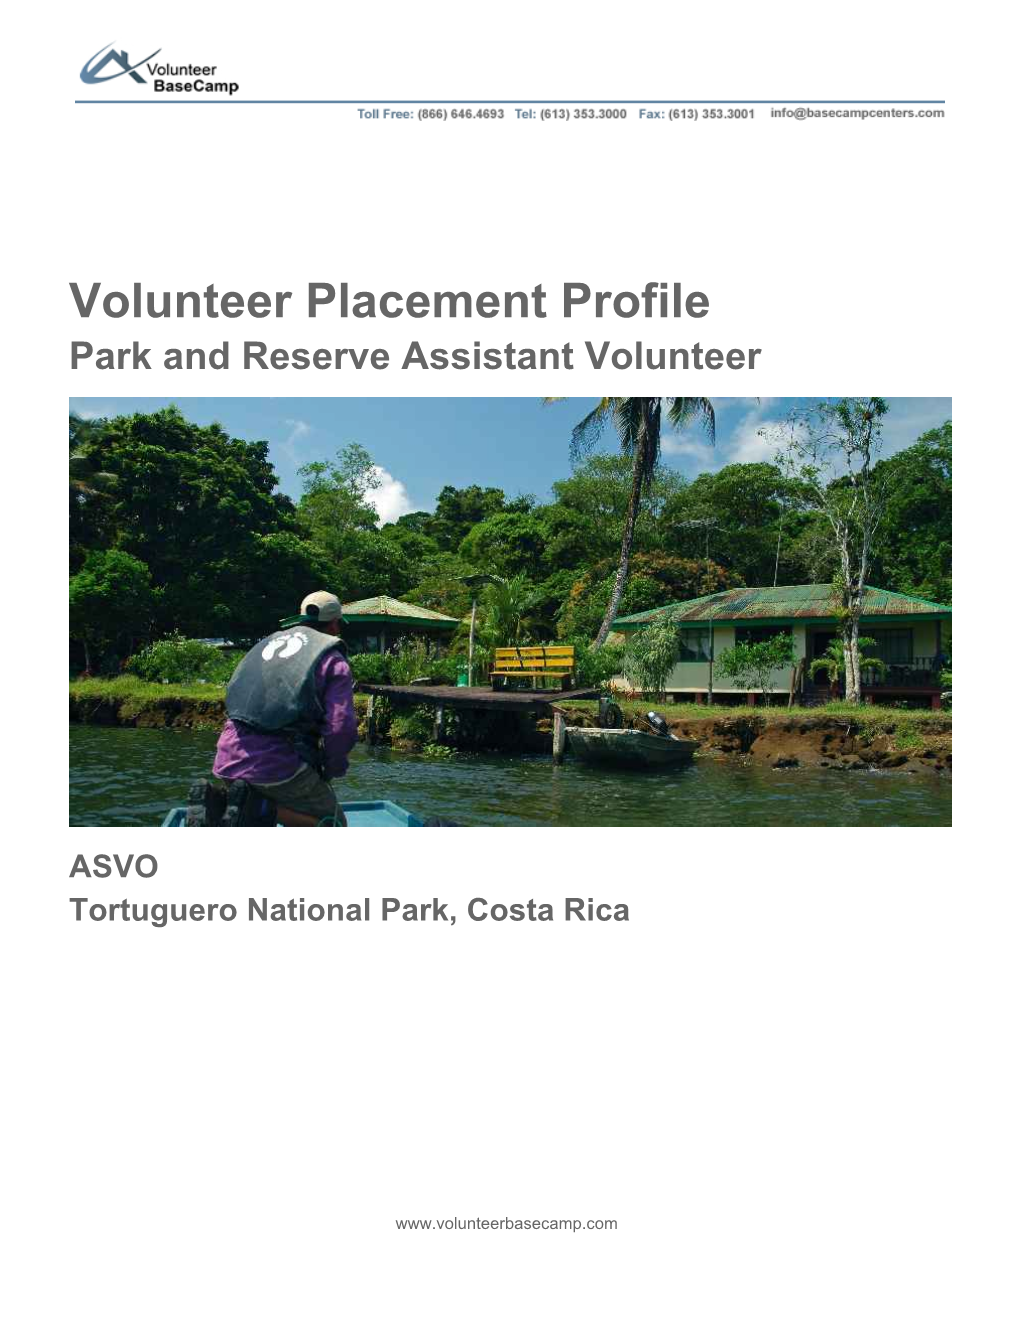 Volunteer Placement Profile Park and Reserve Assistant Volunteer